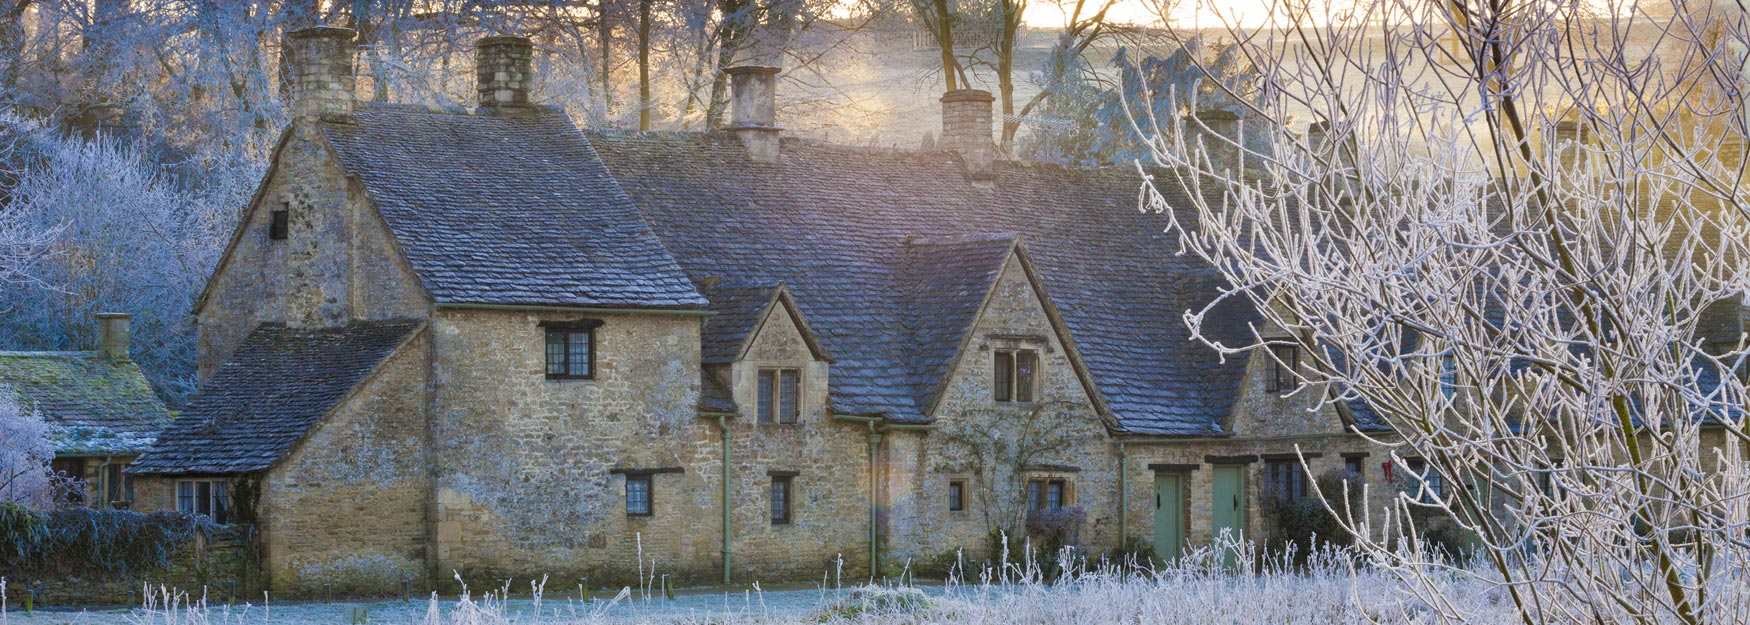 Arlington Row in Bibury on a crisp and frosty morning